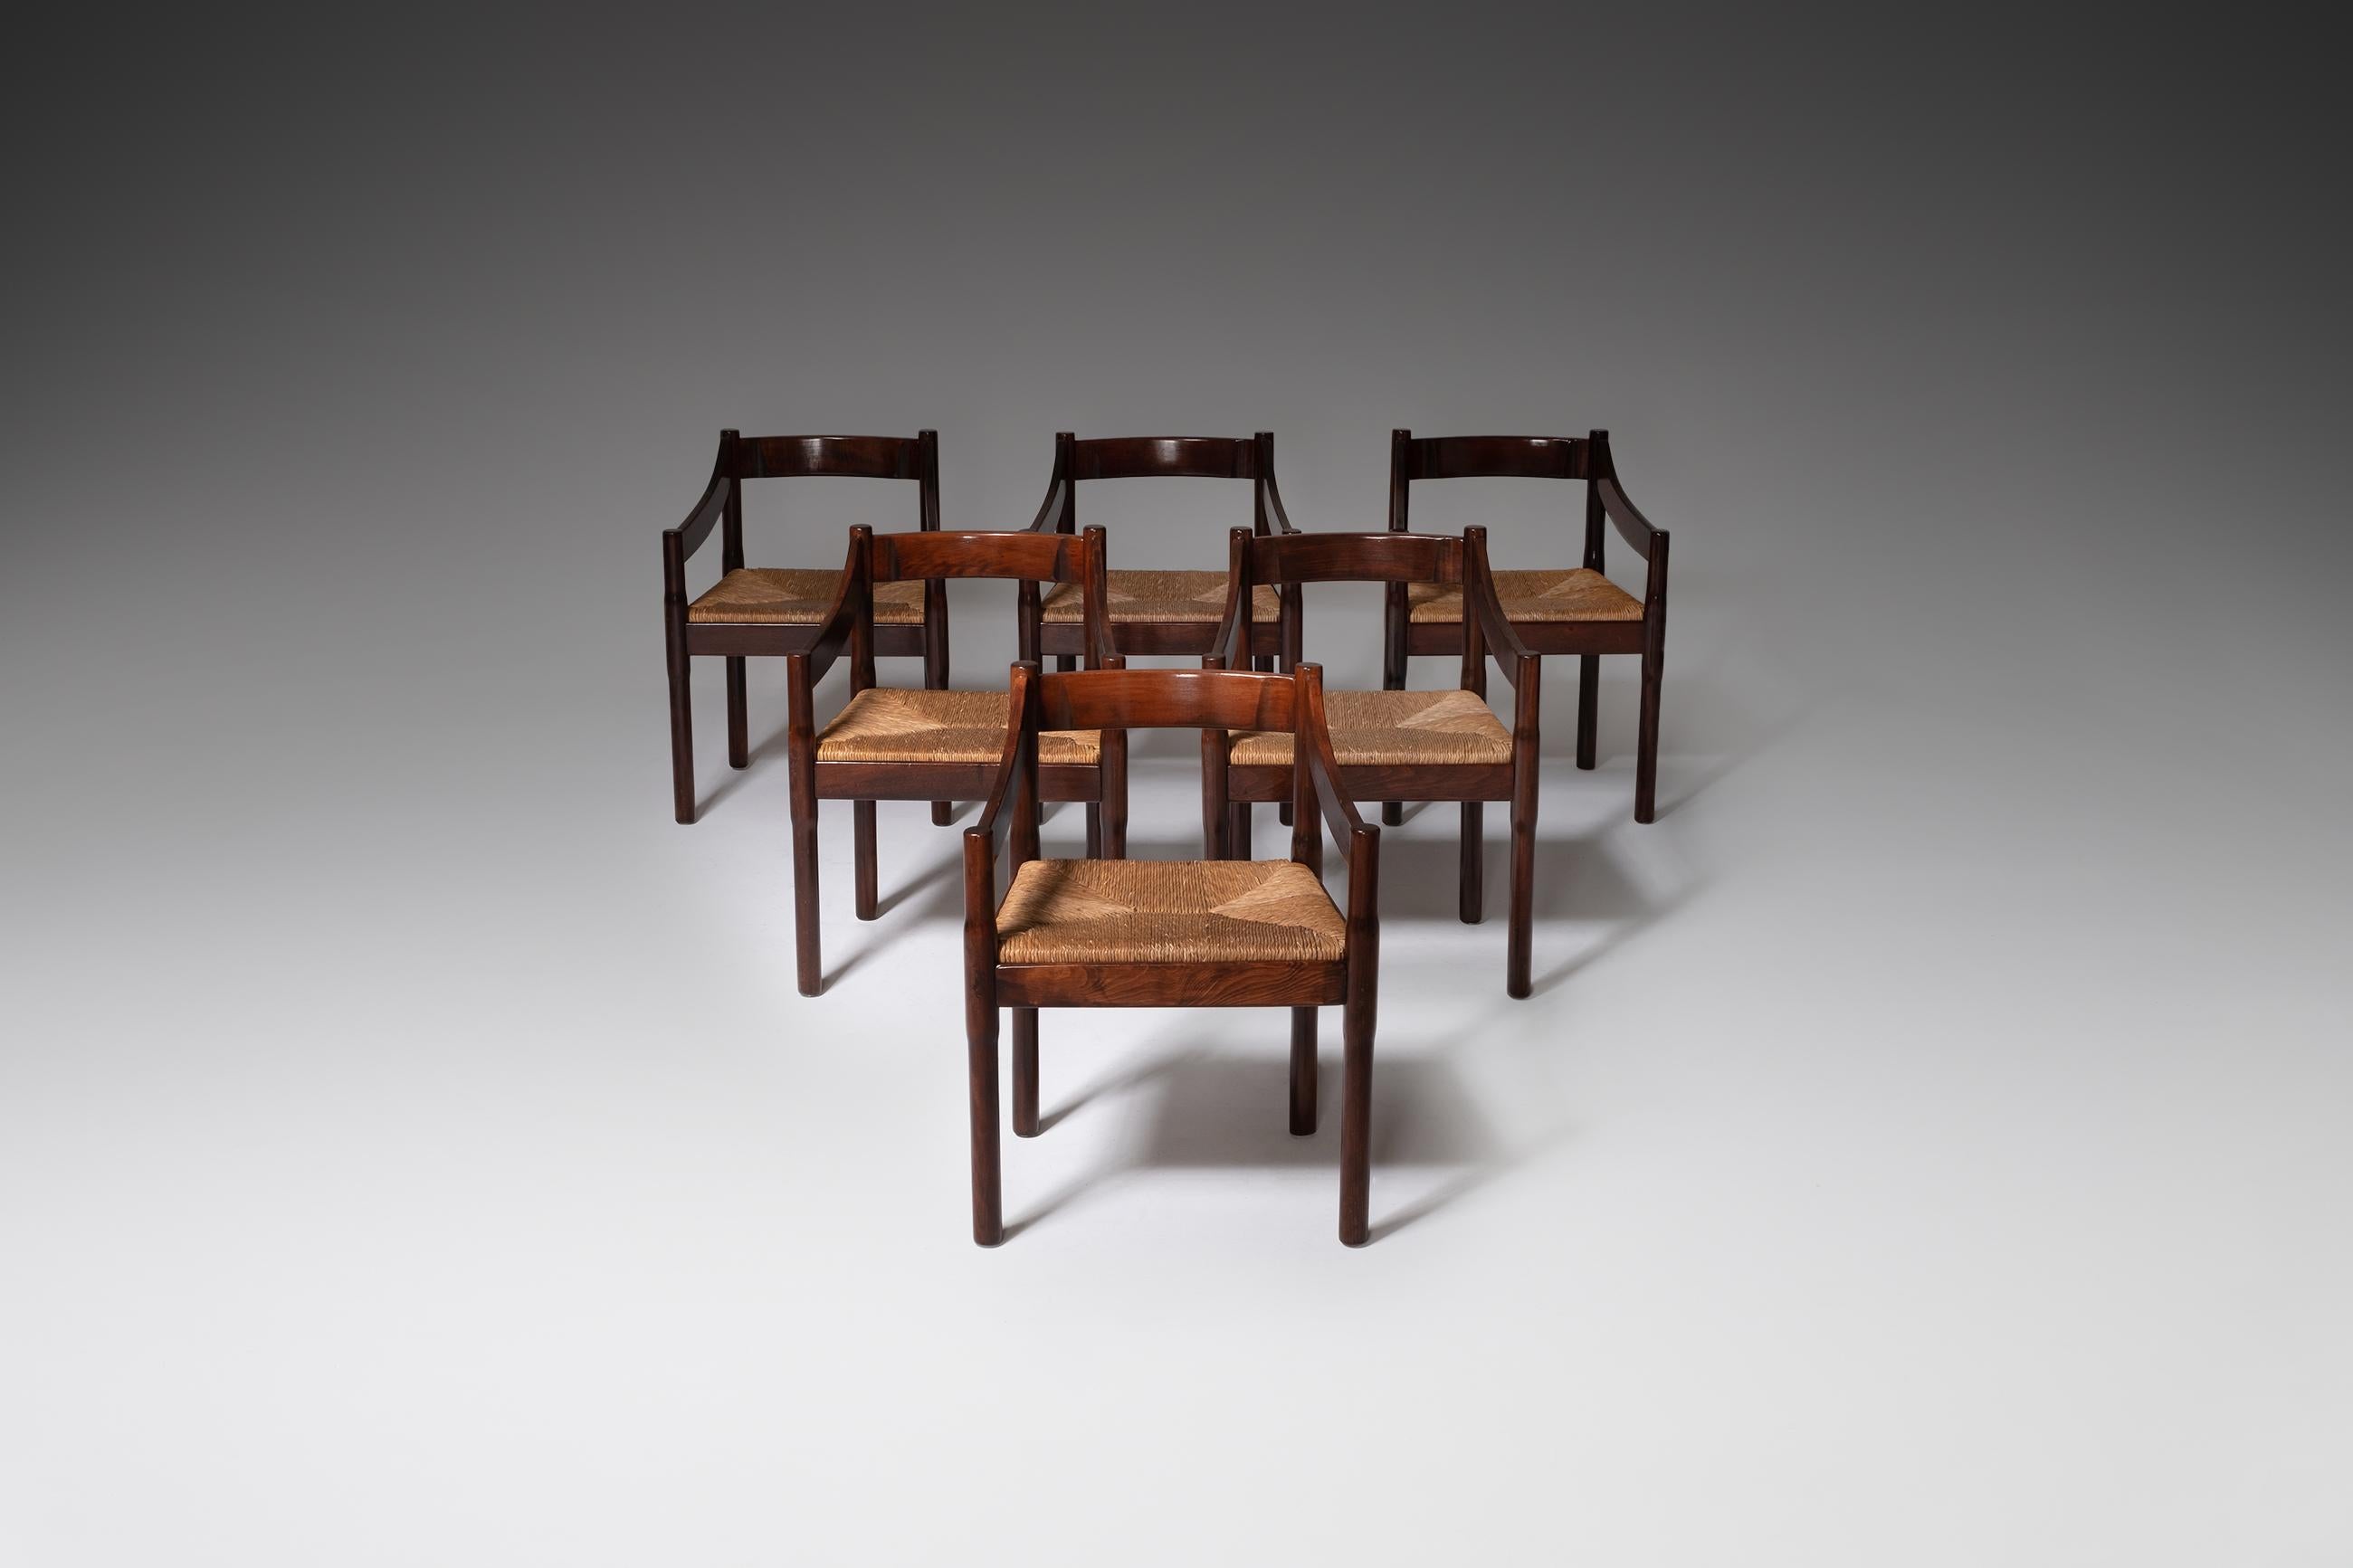 Set of six ‘Carimate’ dining chairs by Vico Magistretti for Cassina, Italy, 1962. The beautiful combination of natural materials such as the stained walnut and rush seatings give these chairs an elegant and warm look. The chairs where originally